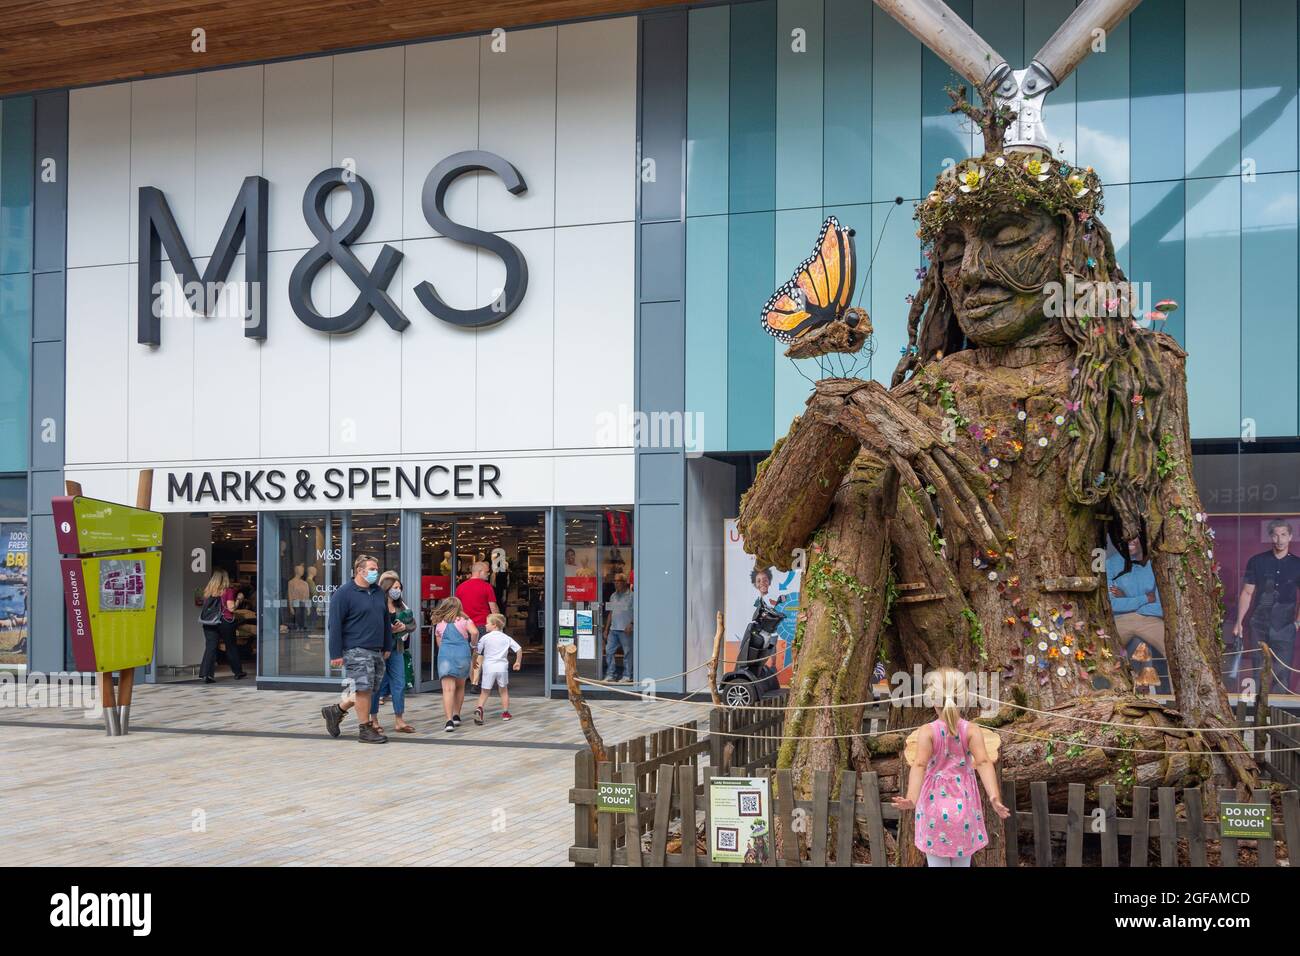 M&S store and Bracknell Forest Giant sculpture, The Avenue, The Lexicon, Bracknell, Berkshire, England, United Kingdom Stock Photo